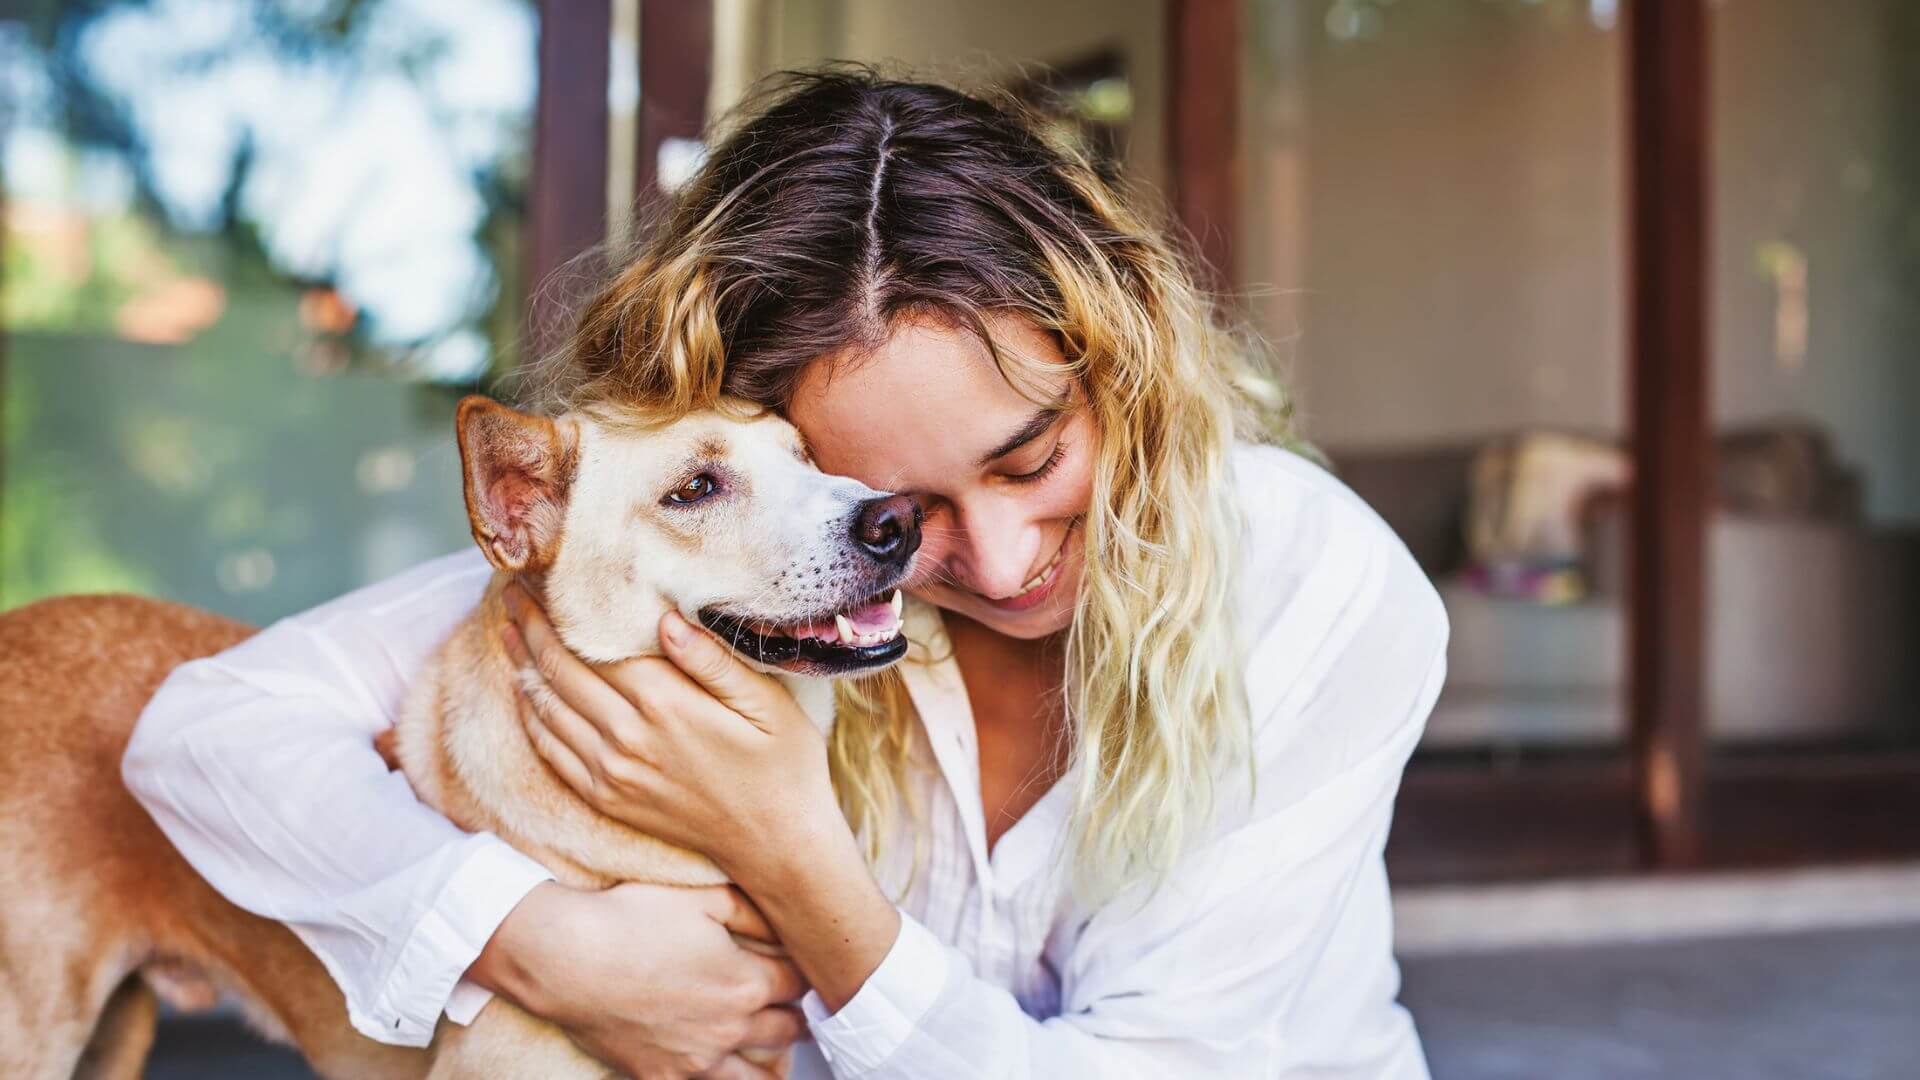 Lifestyle Adjustments to Make When Living with a Pet